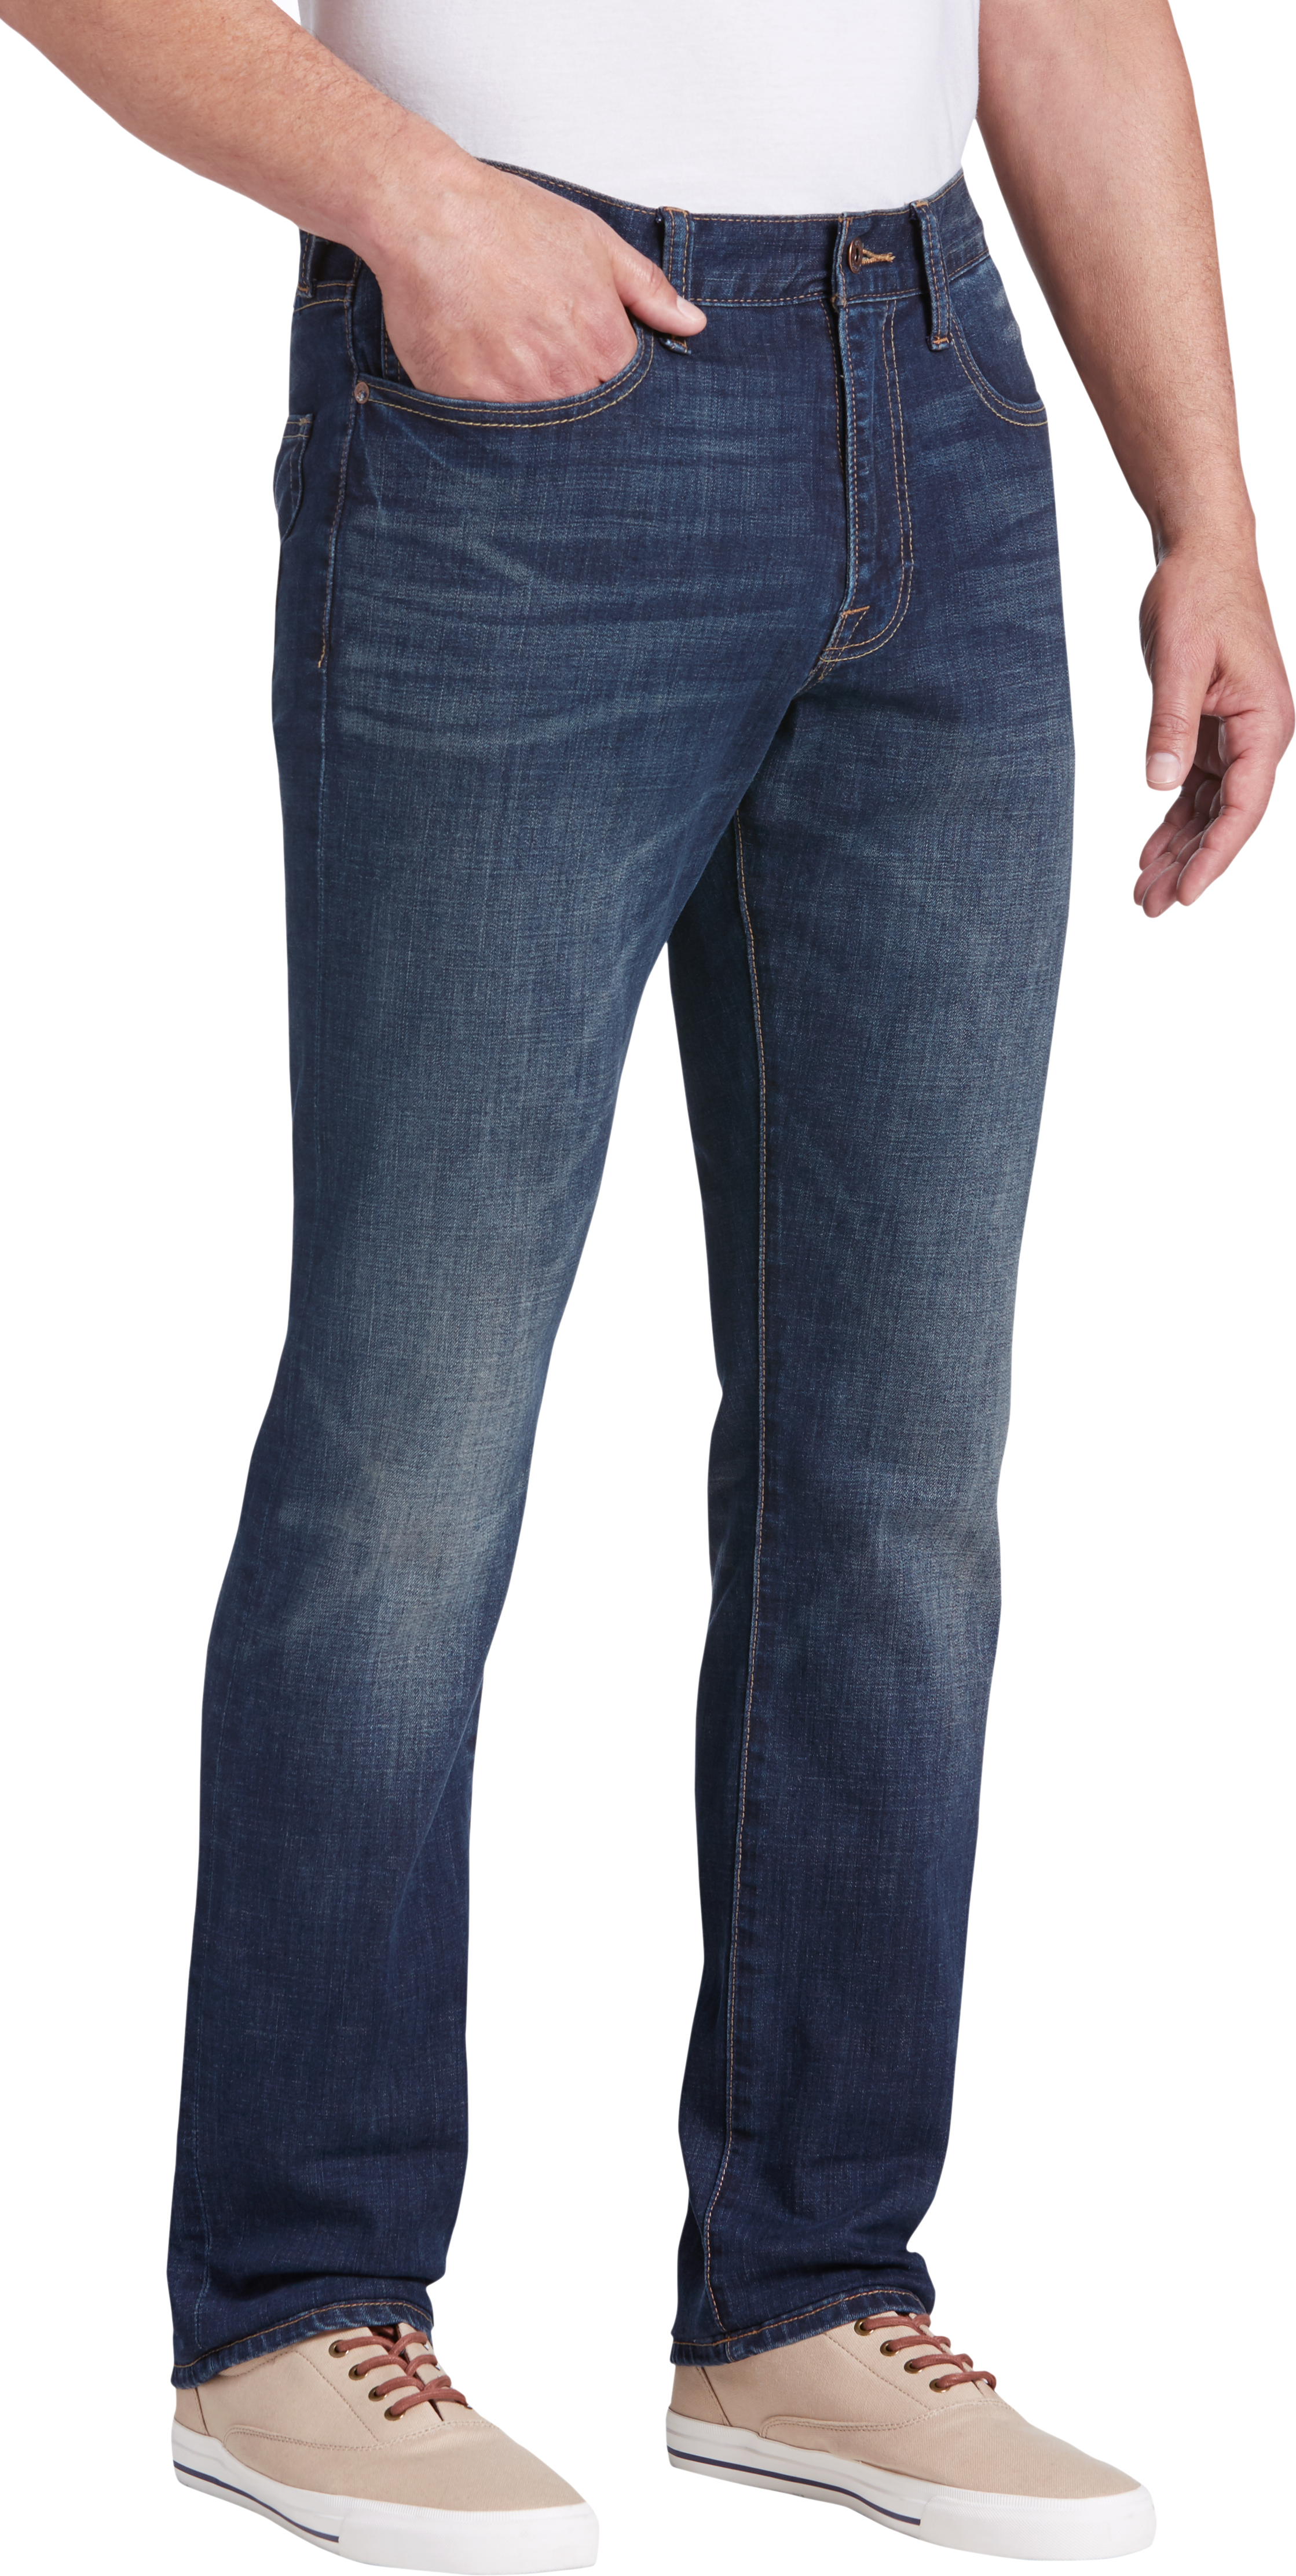 Lucky Brand 329 Shoreline Classic Fit Jeans, Dark Wash